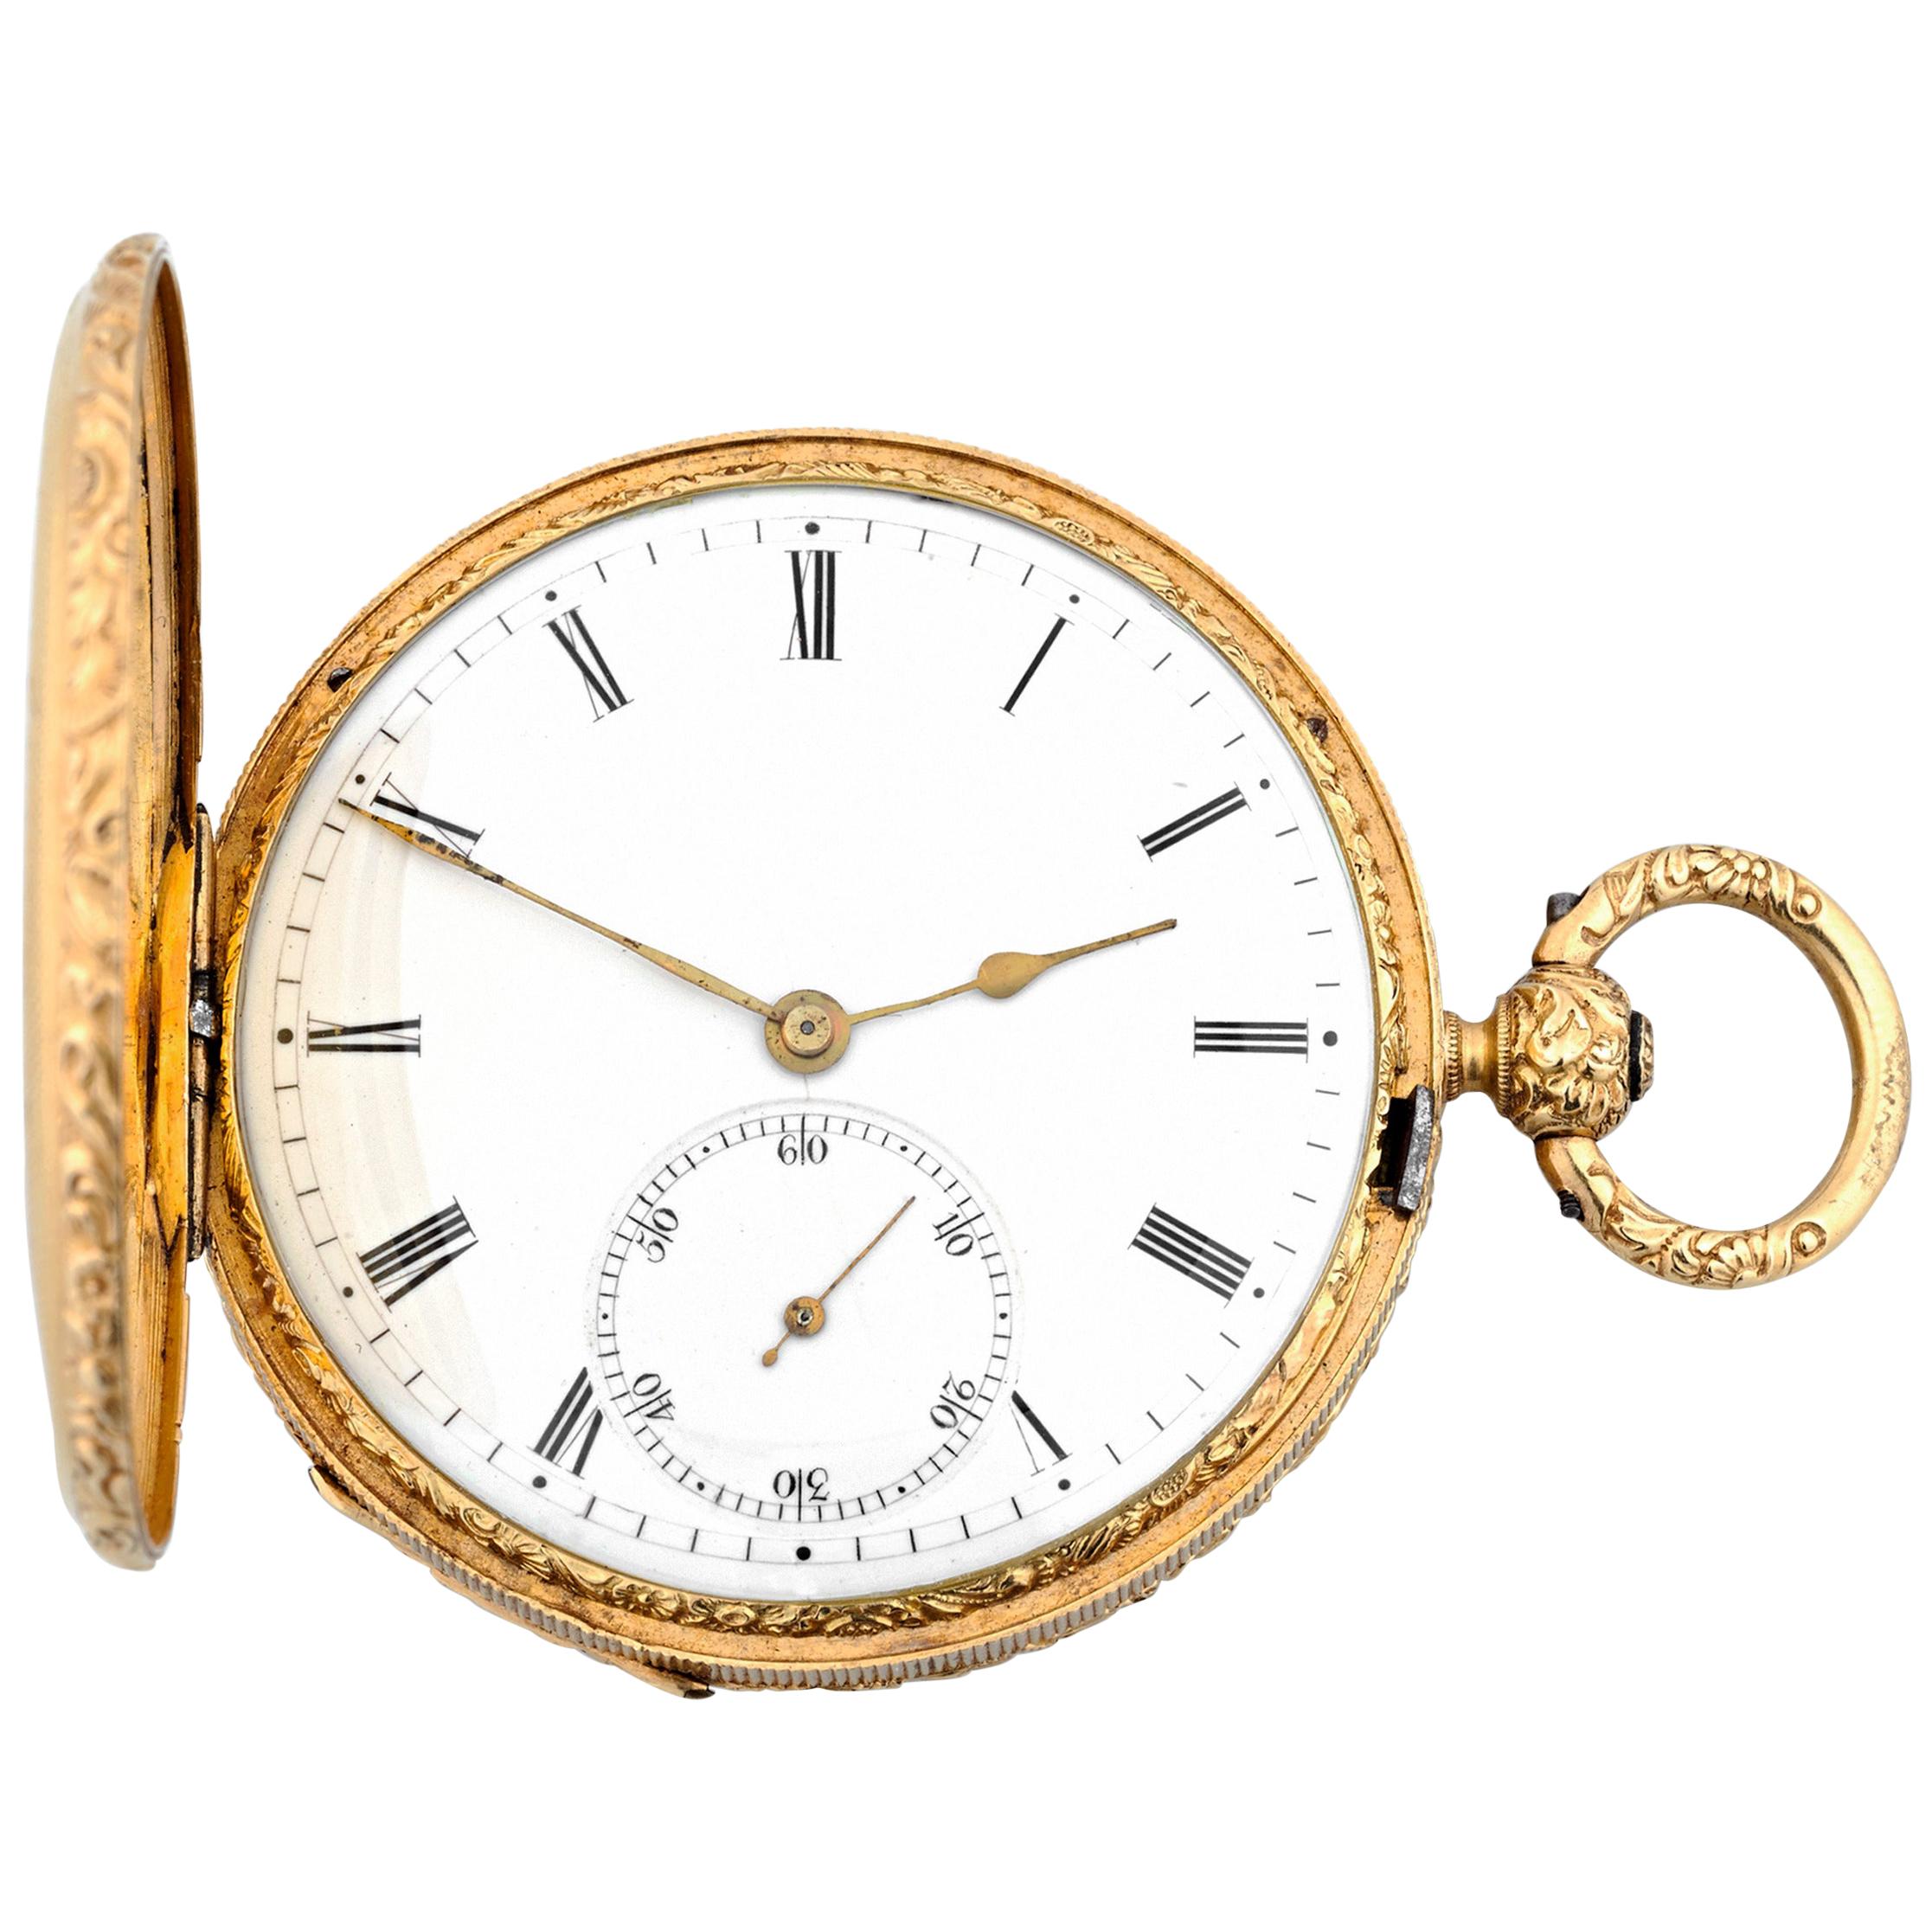 Pope Pius IX Gold Pocket Watch by Aucoc